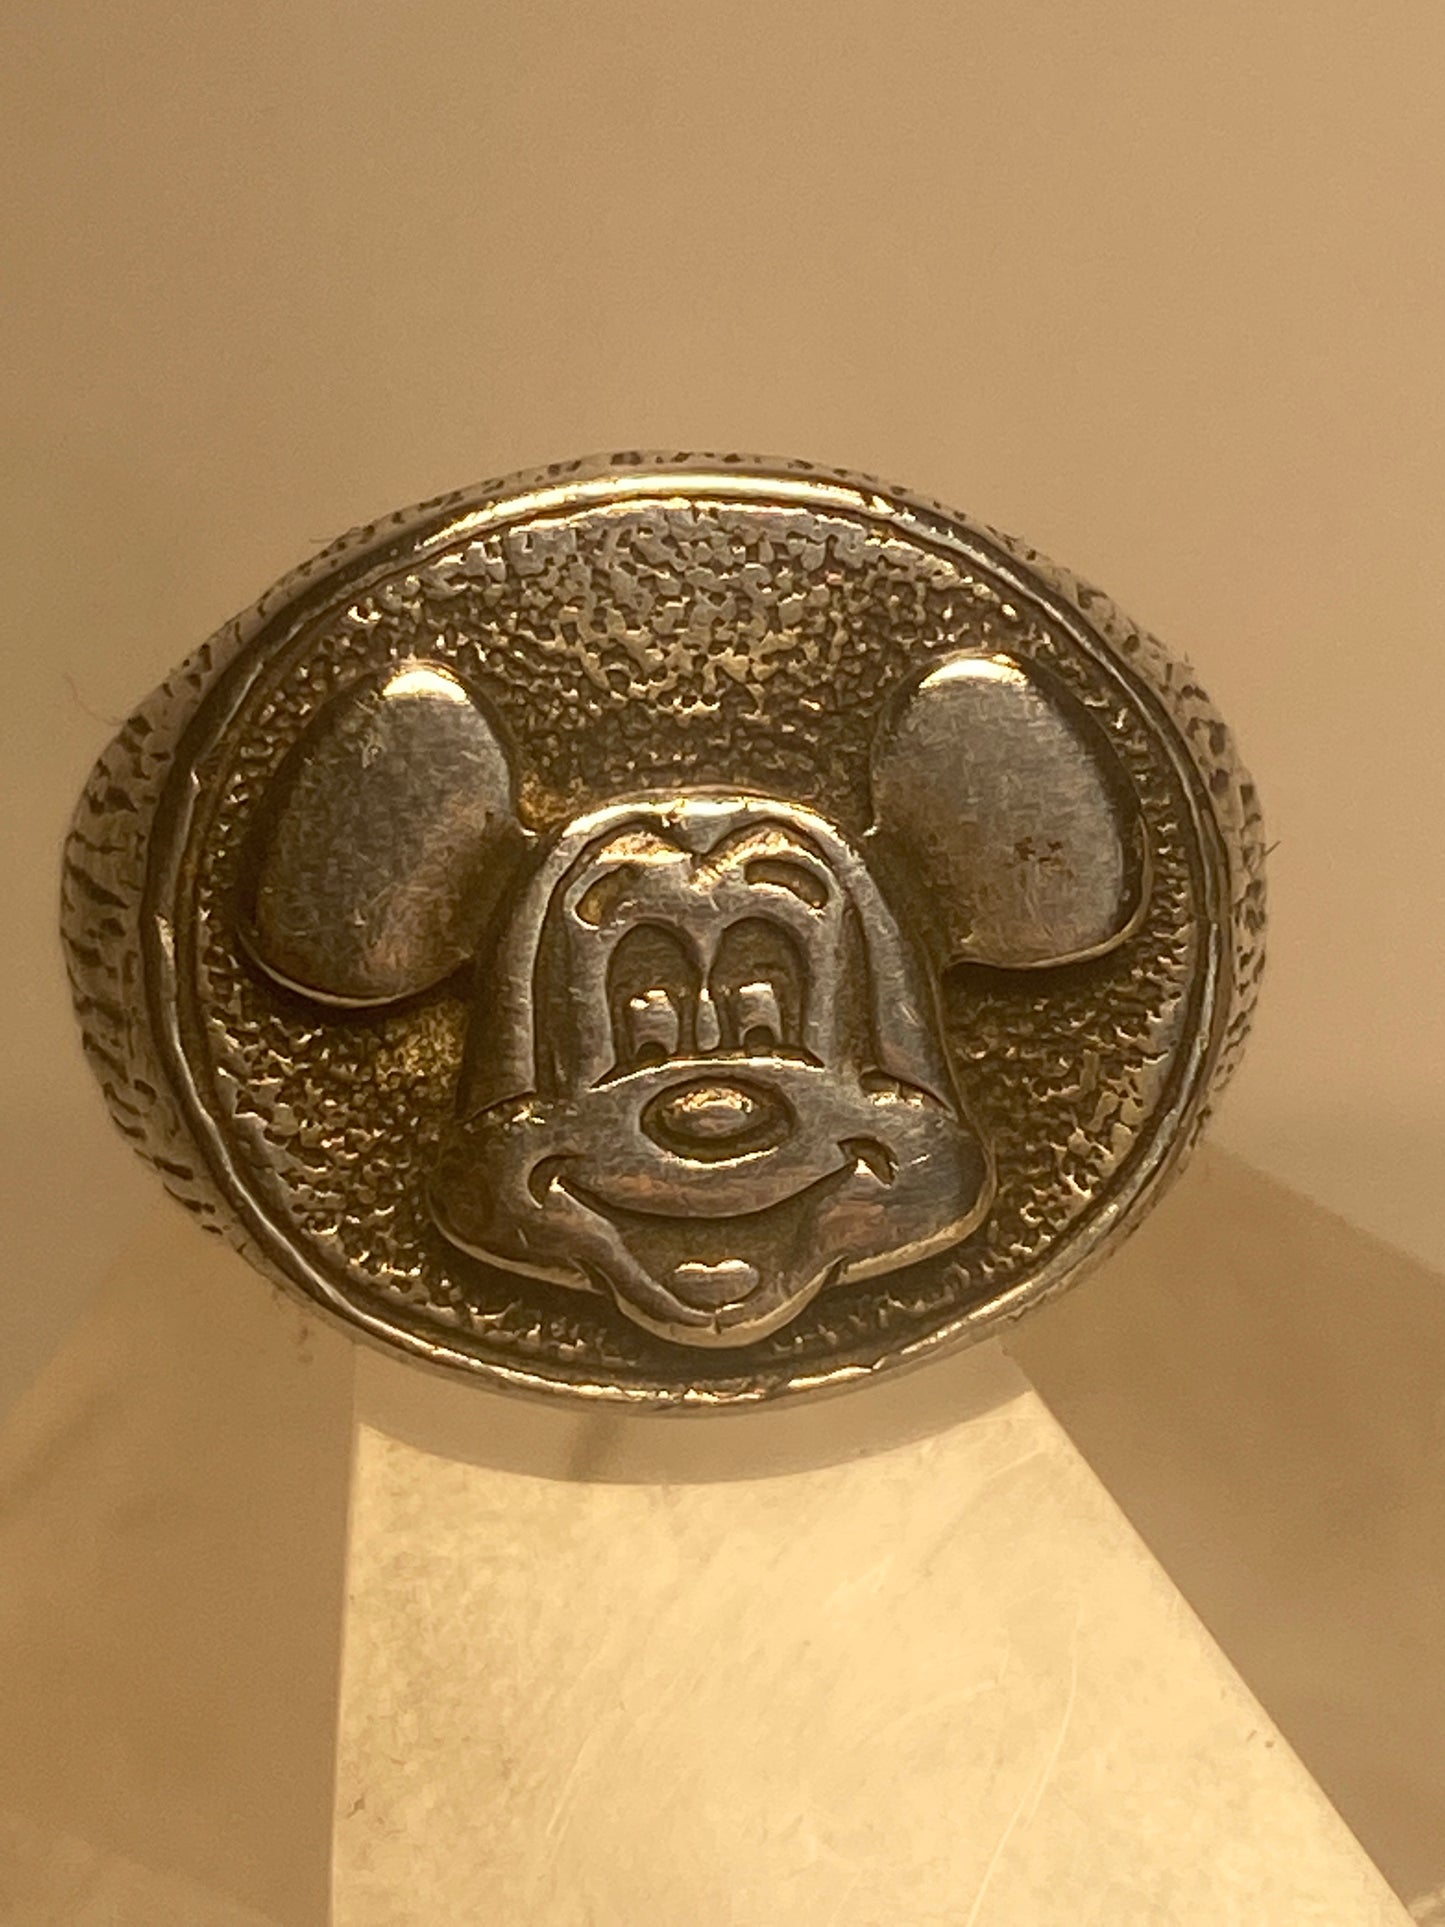 Mickey Mouse ring Walt Disney Productions band  sterling silver women